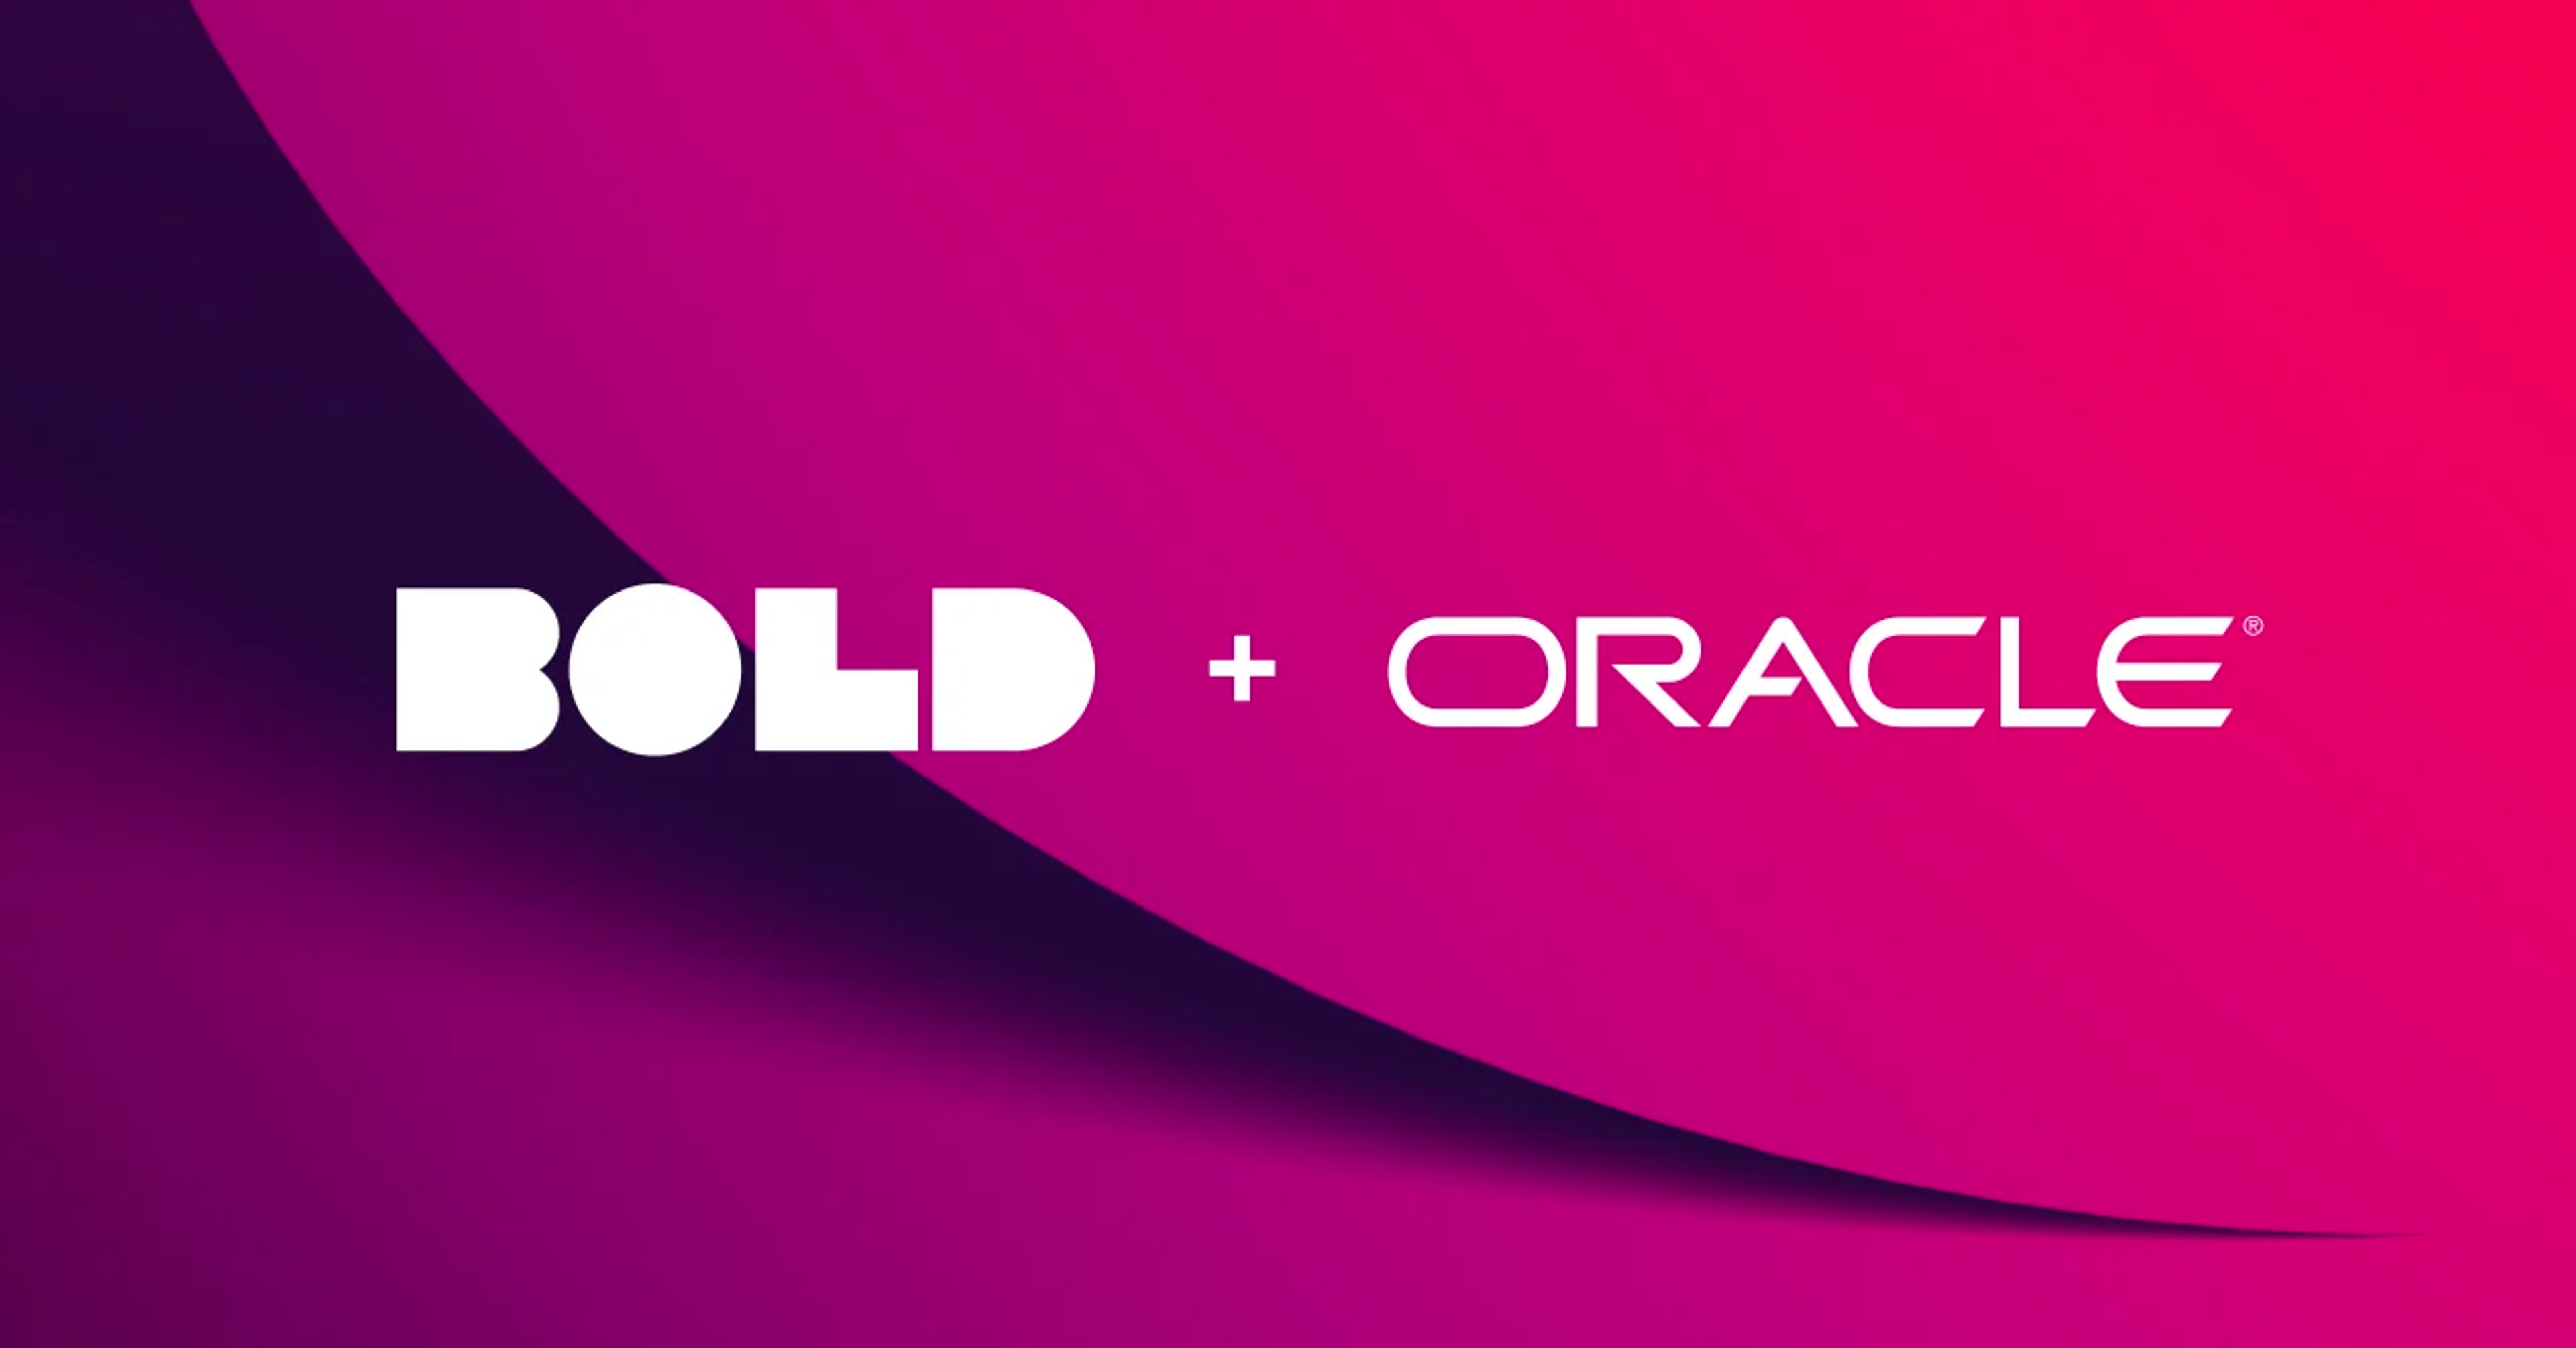 Bold and Oracle logos